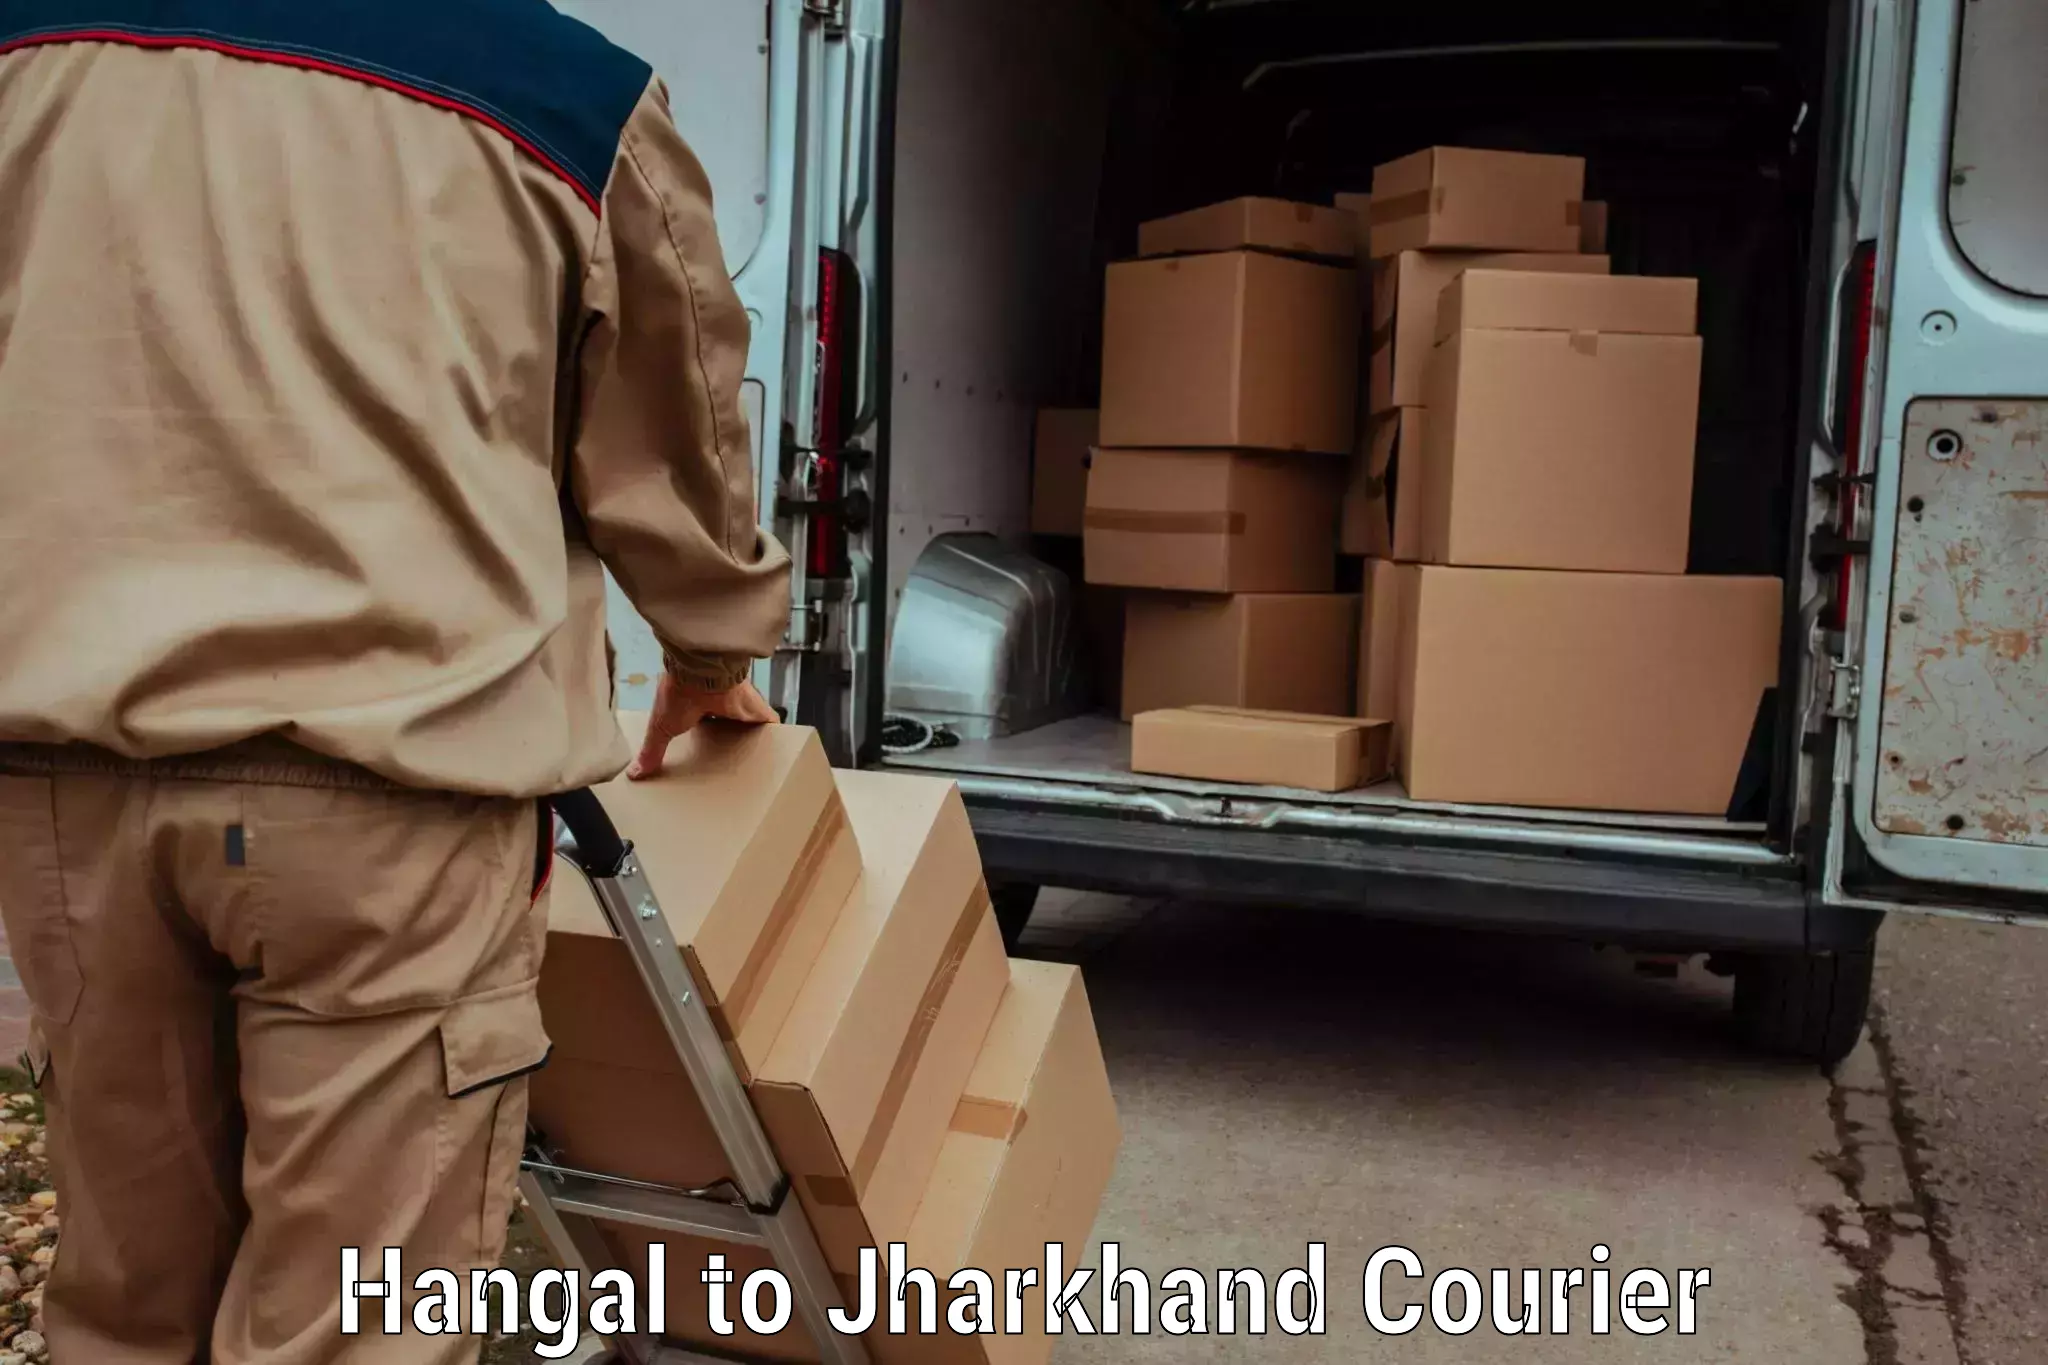 24-hour courier service Hangal to Domchanch